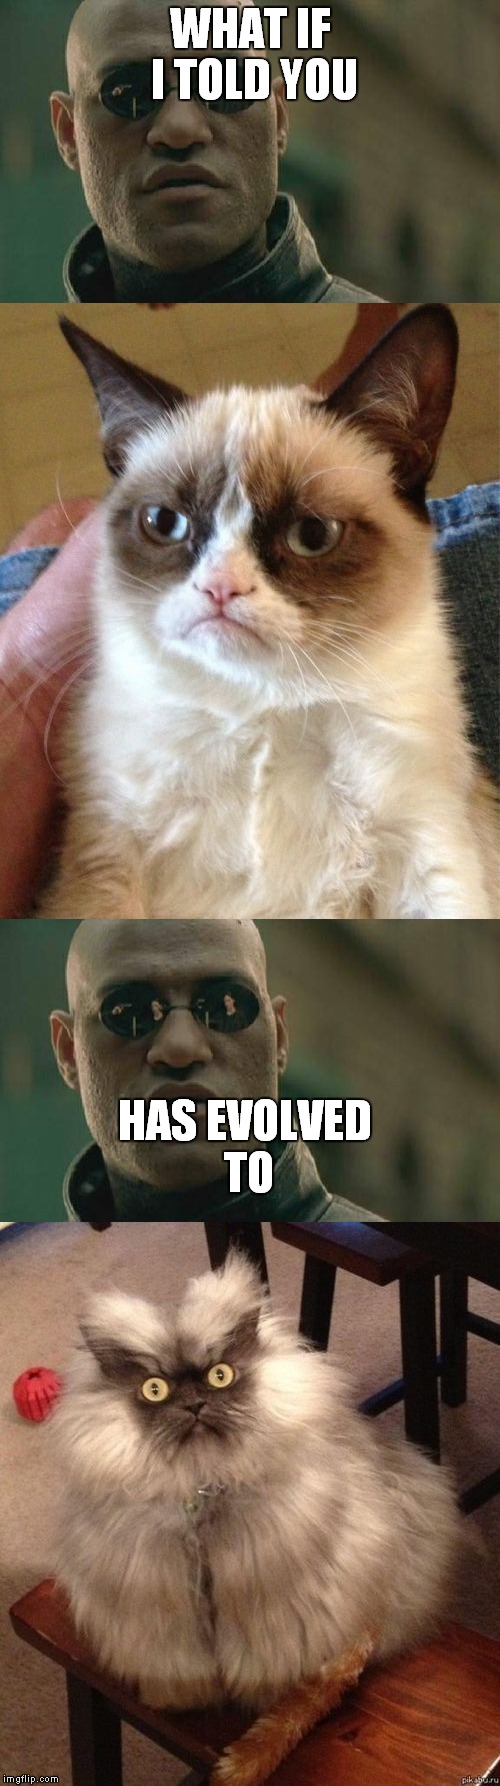 WHAT IF I TOLD YOU; HAS EVOLVED TO | image tagged in memes,grumpy cat double,matrix morpheaus | made w/ Imgflip meme maker